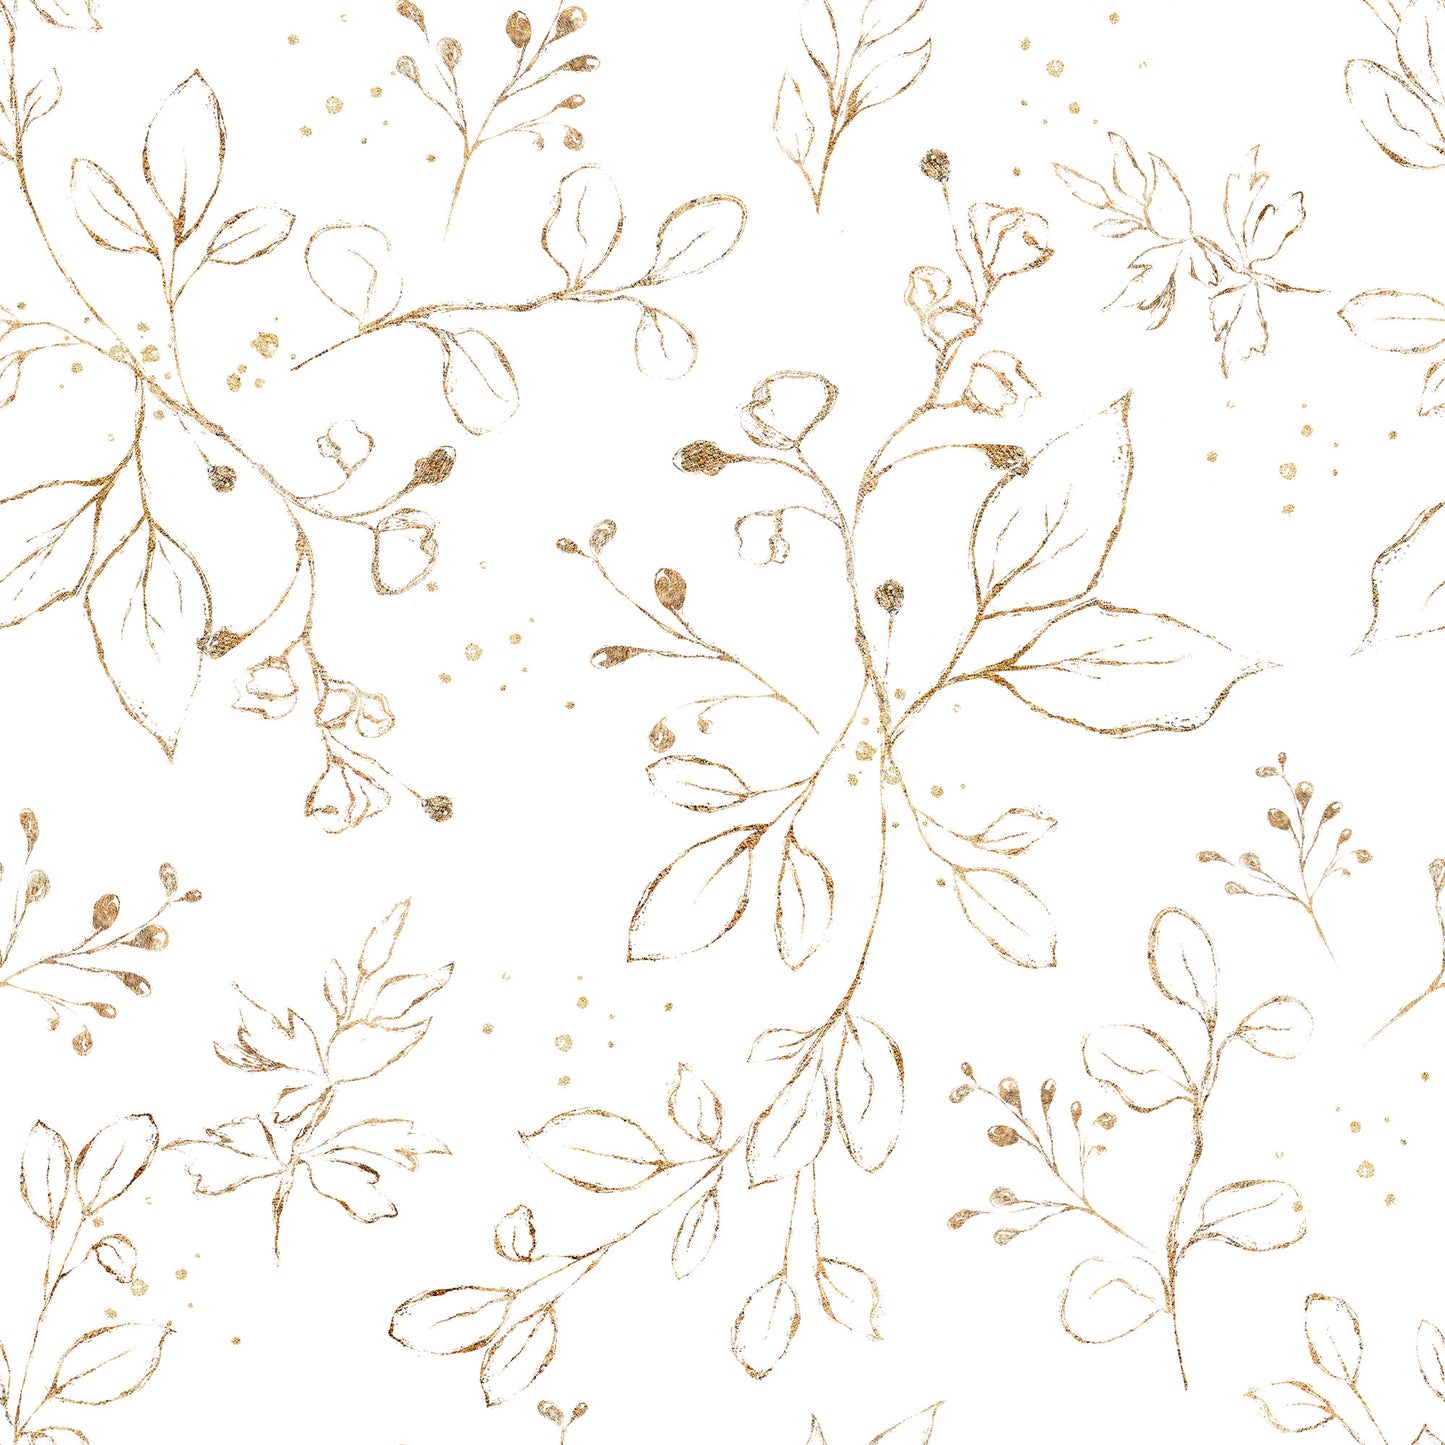 Delicate gold floral/foliage print on cream background easy to install and remove peel and stick custom wallpaper available in different lengths/sizes locally created and printed in Canada. Removable, washable, durable, commercial grade, customizable and water proof.